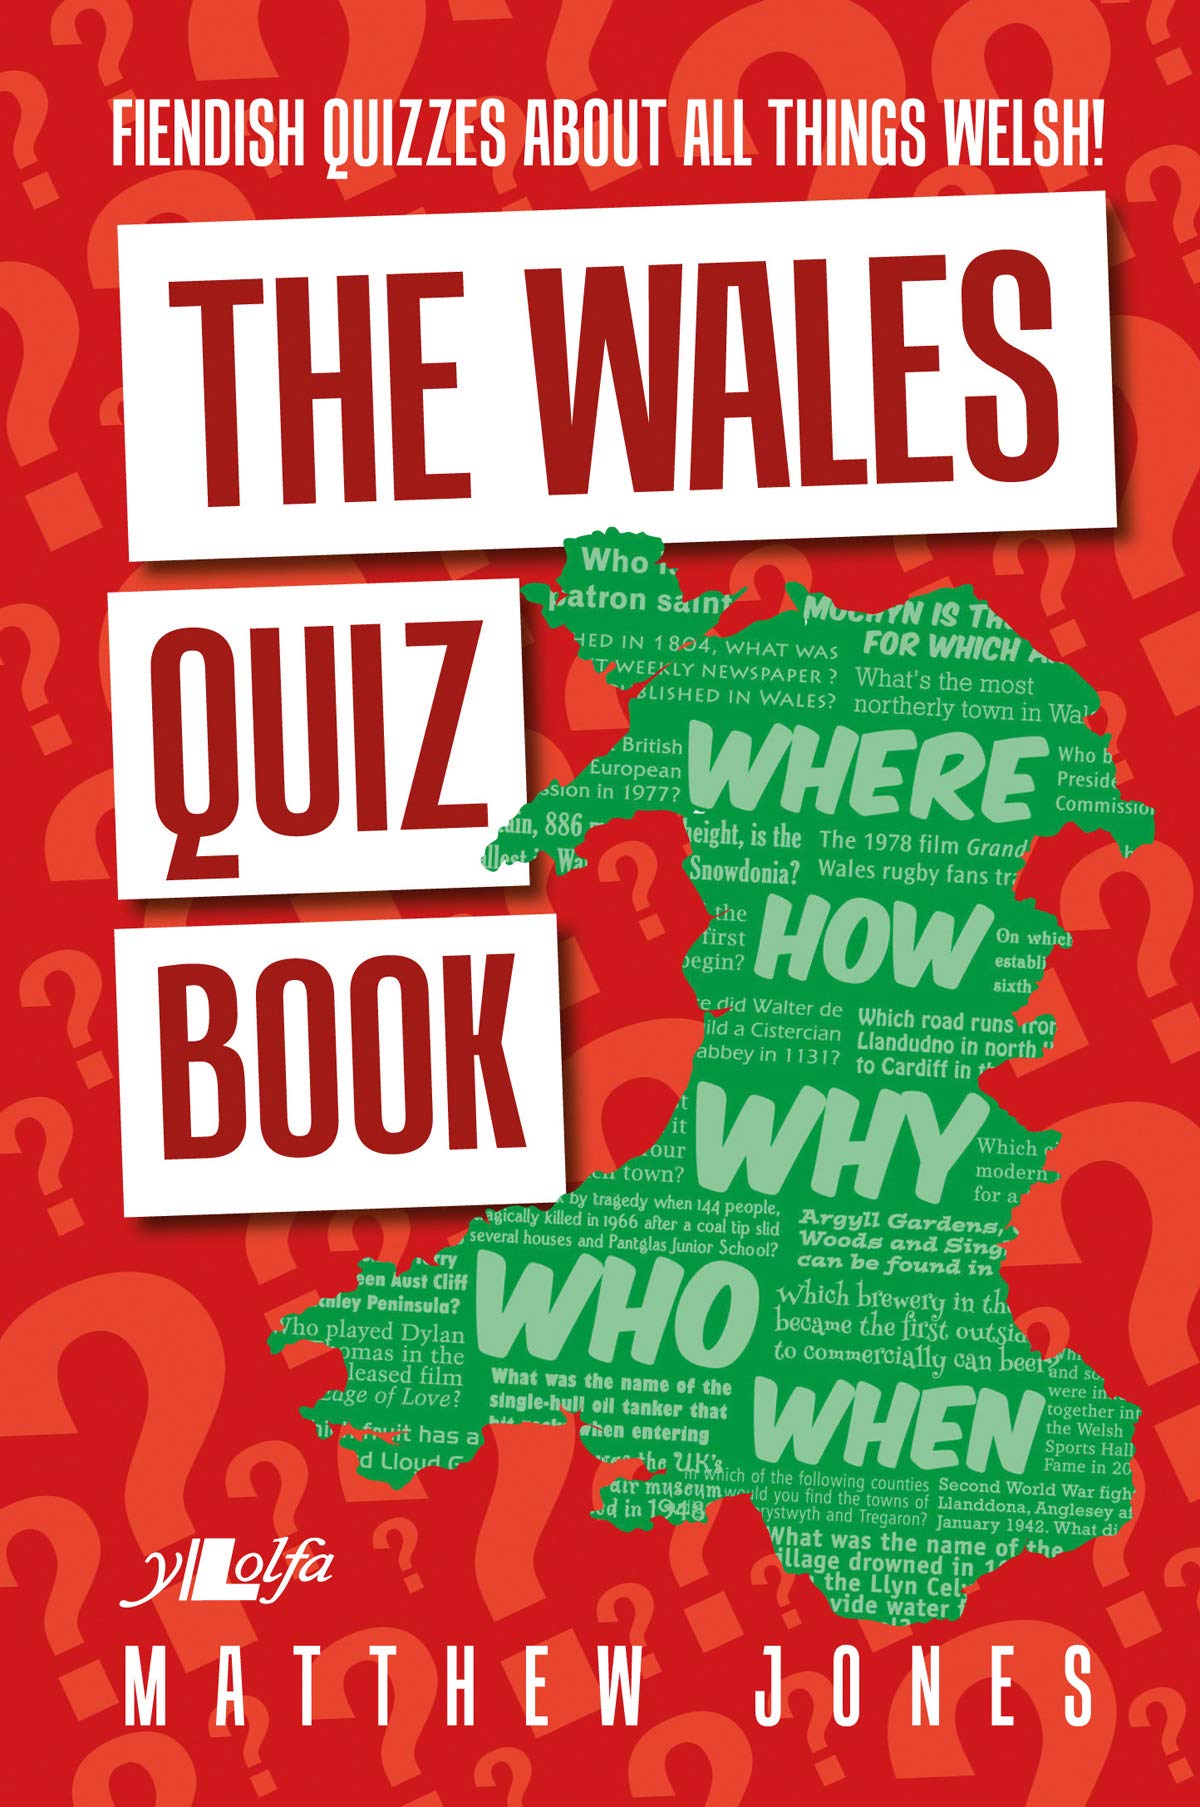 Book - The Wales Quiz Book - Paperback